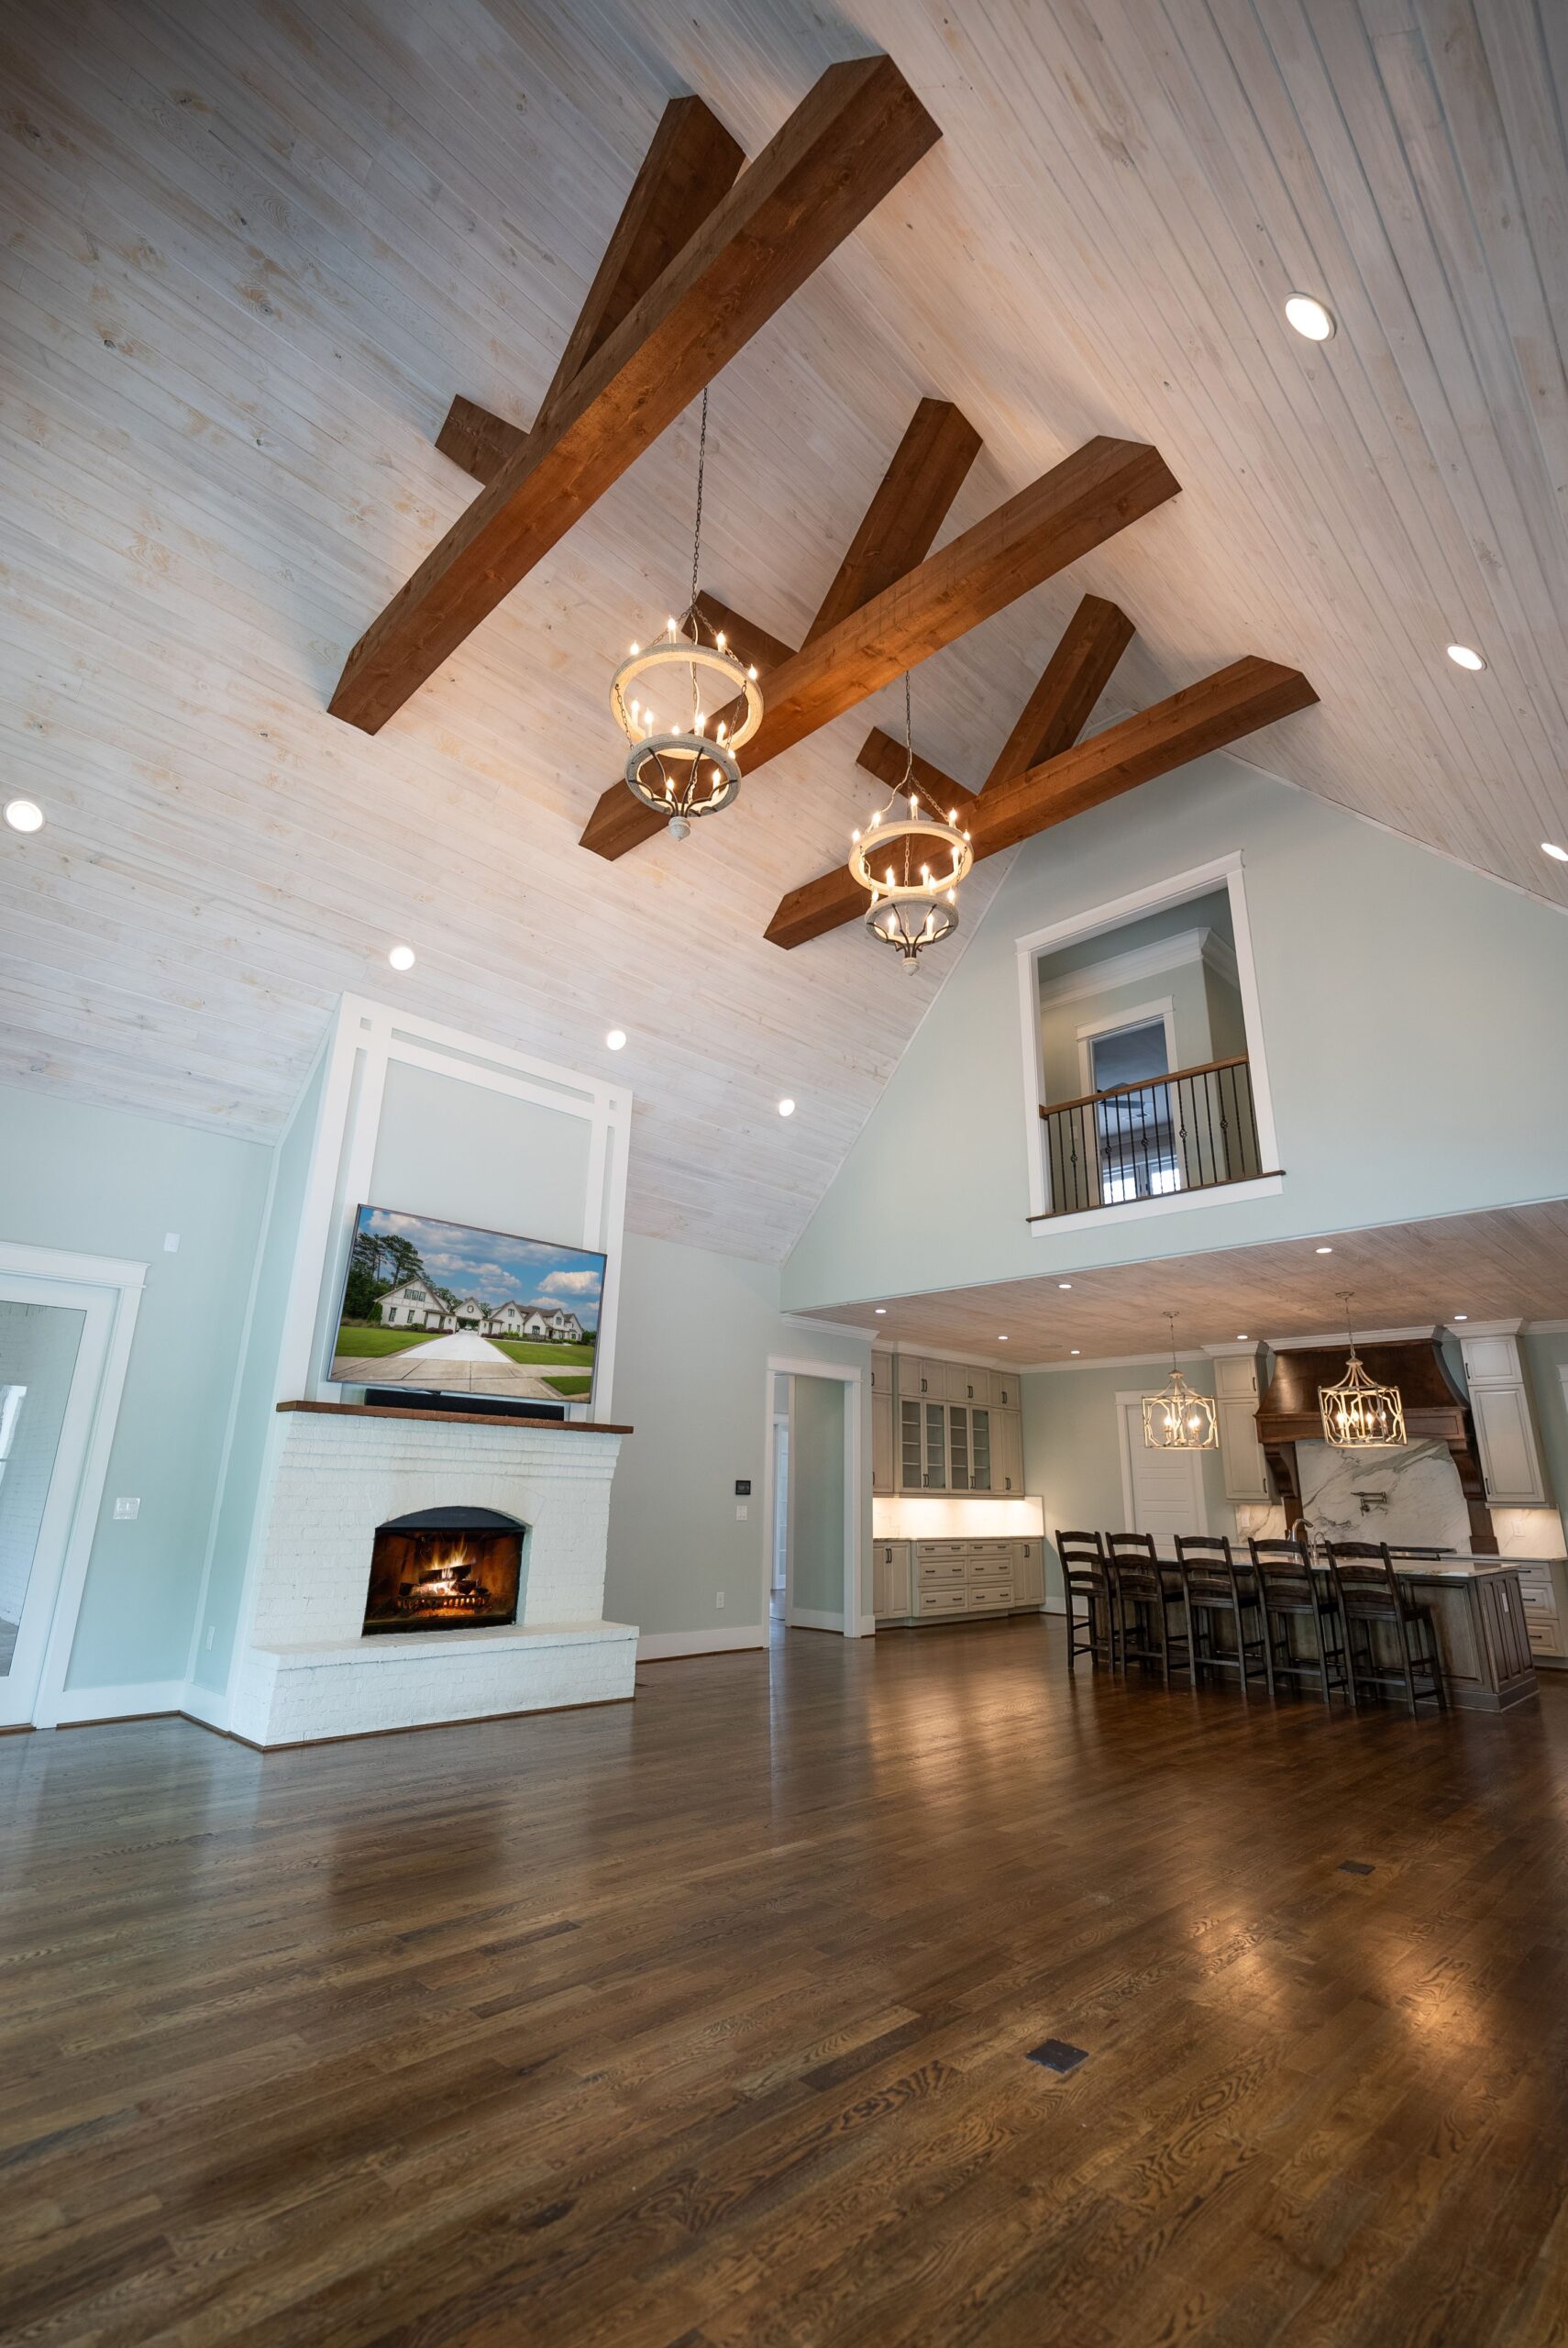 A large open living room with wood beams and fireplace.